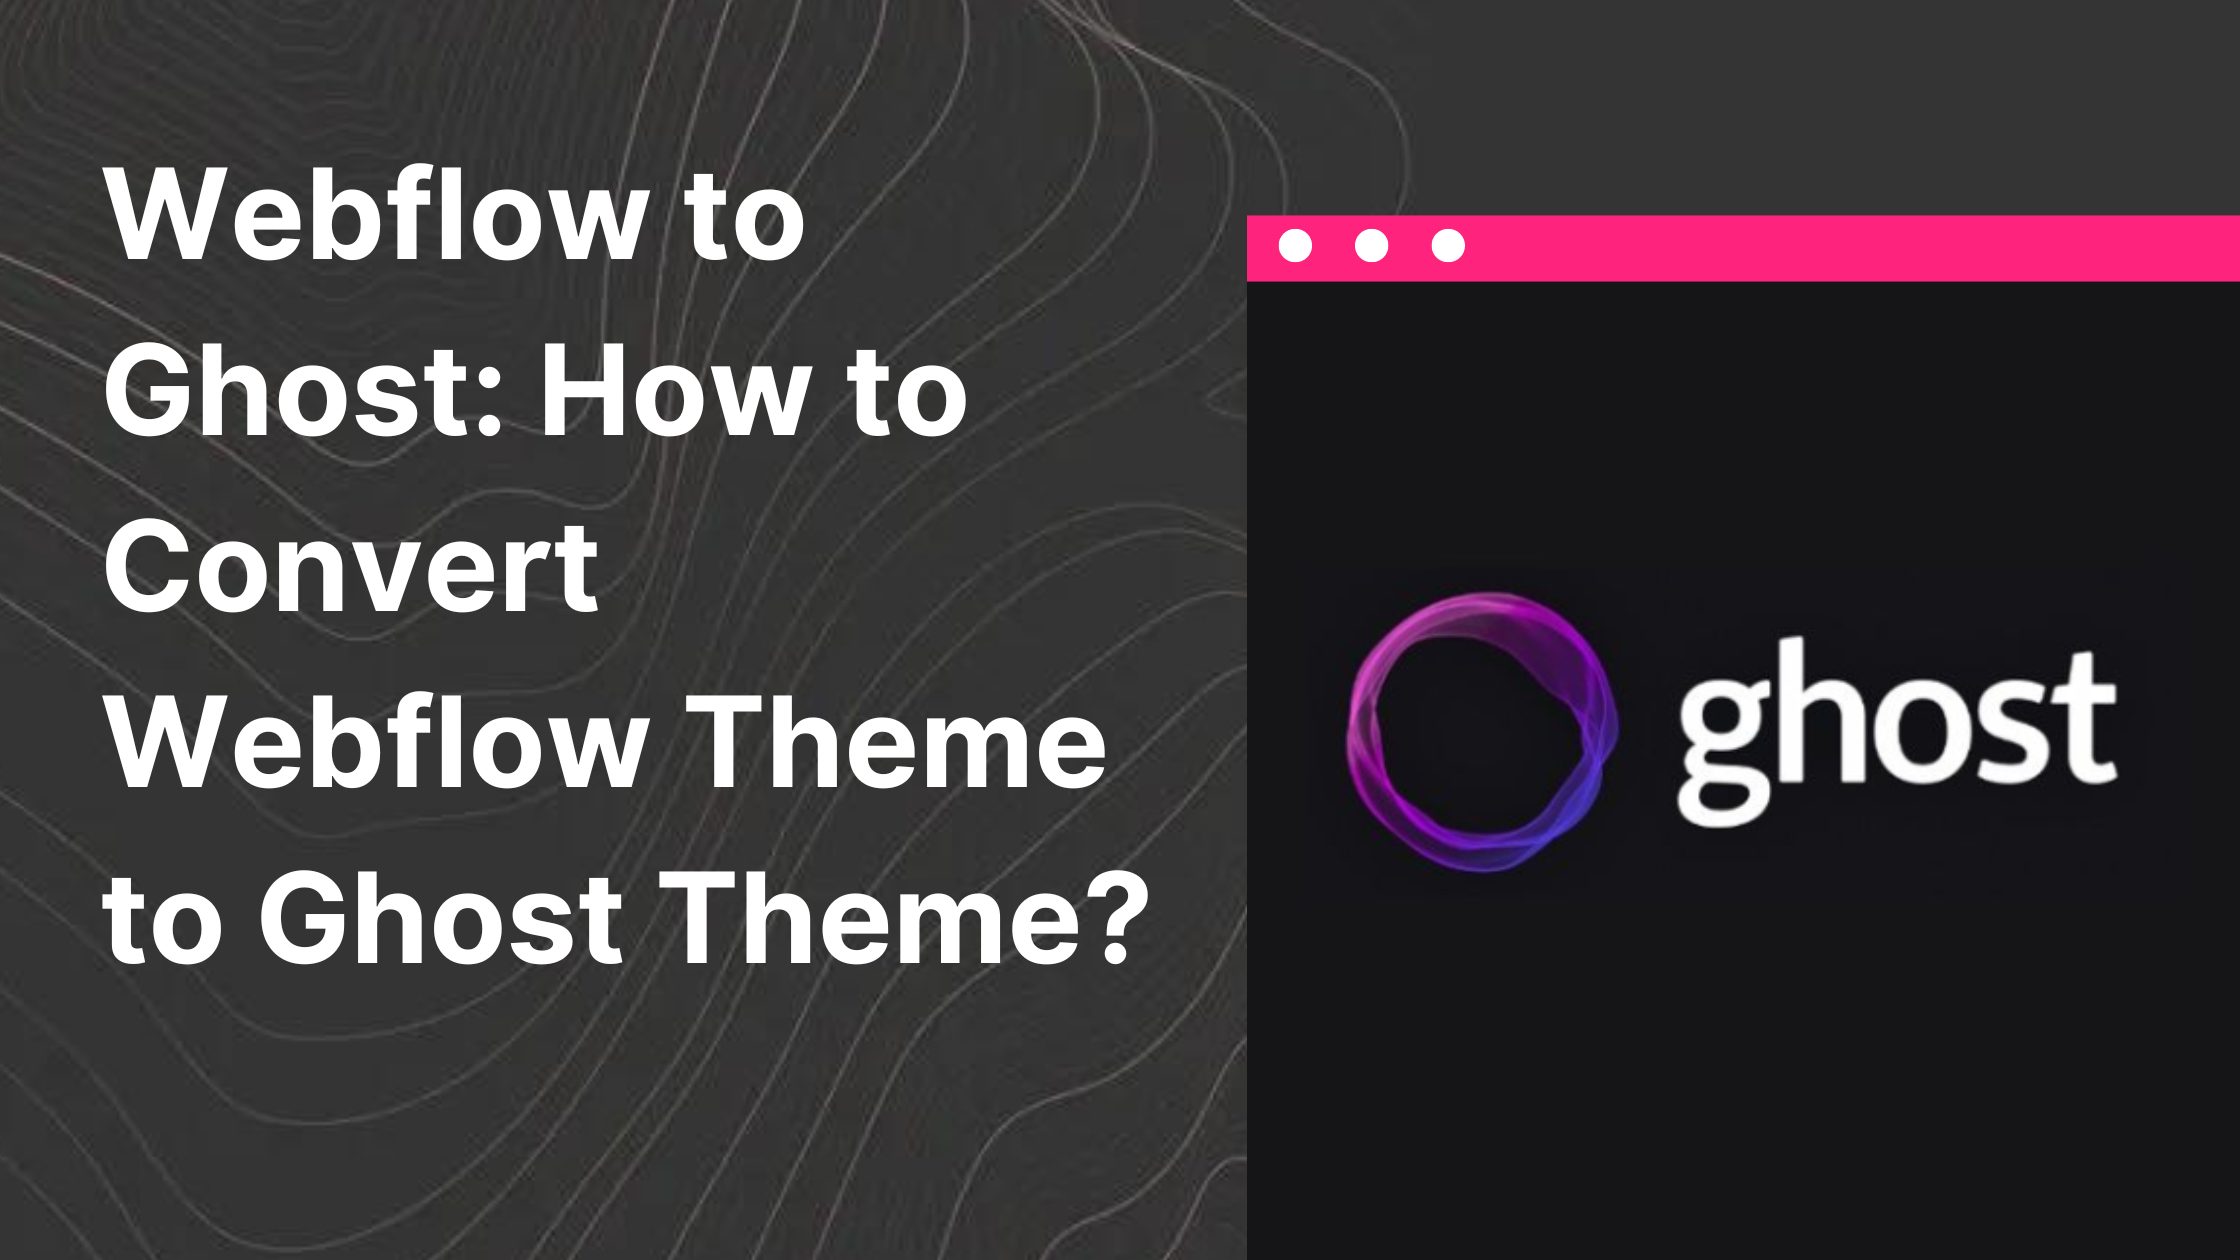 Webflow to Ghost: How to Convert Webflow Theme to Ghost Theme?